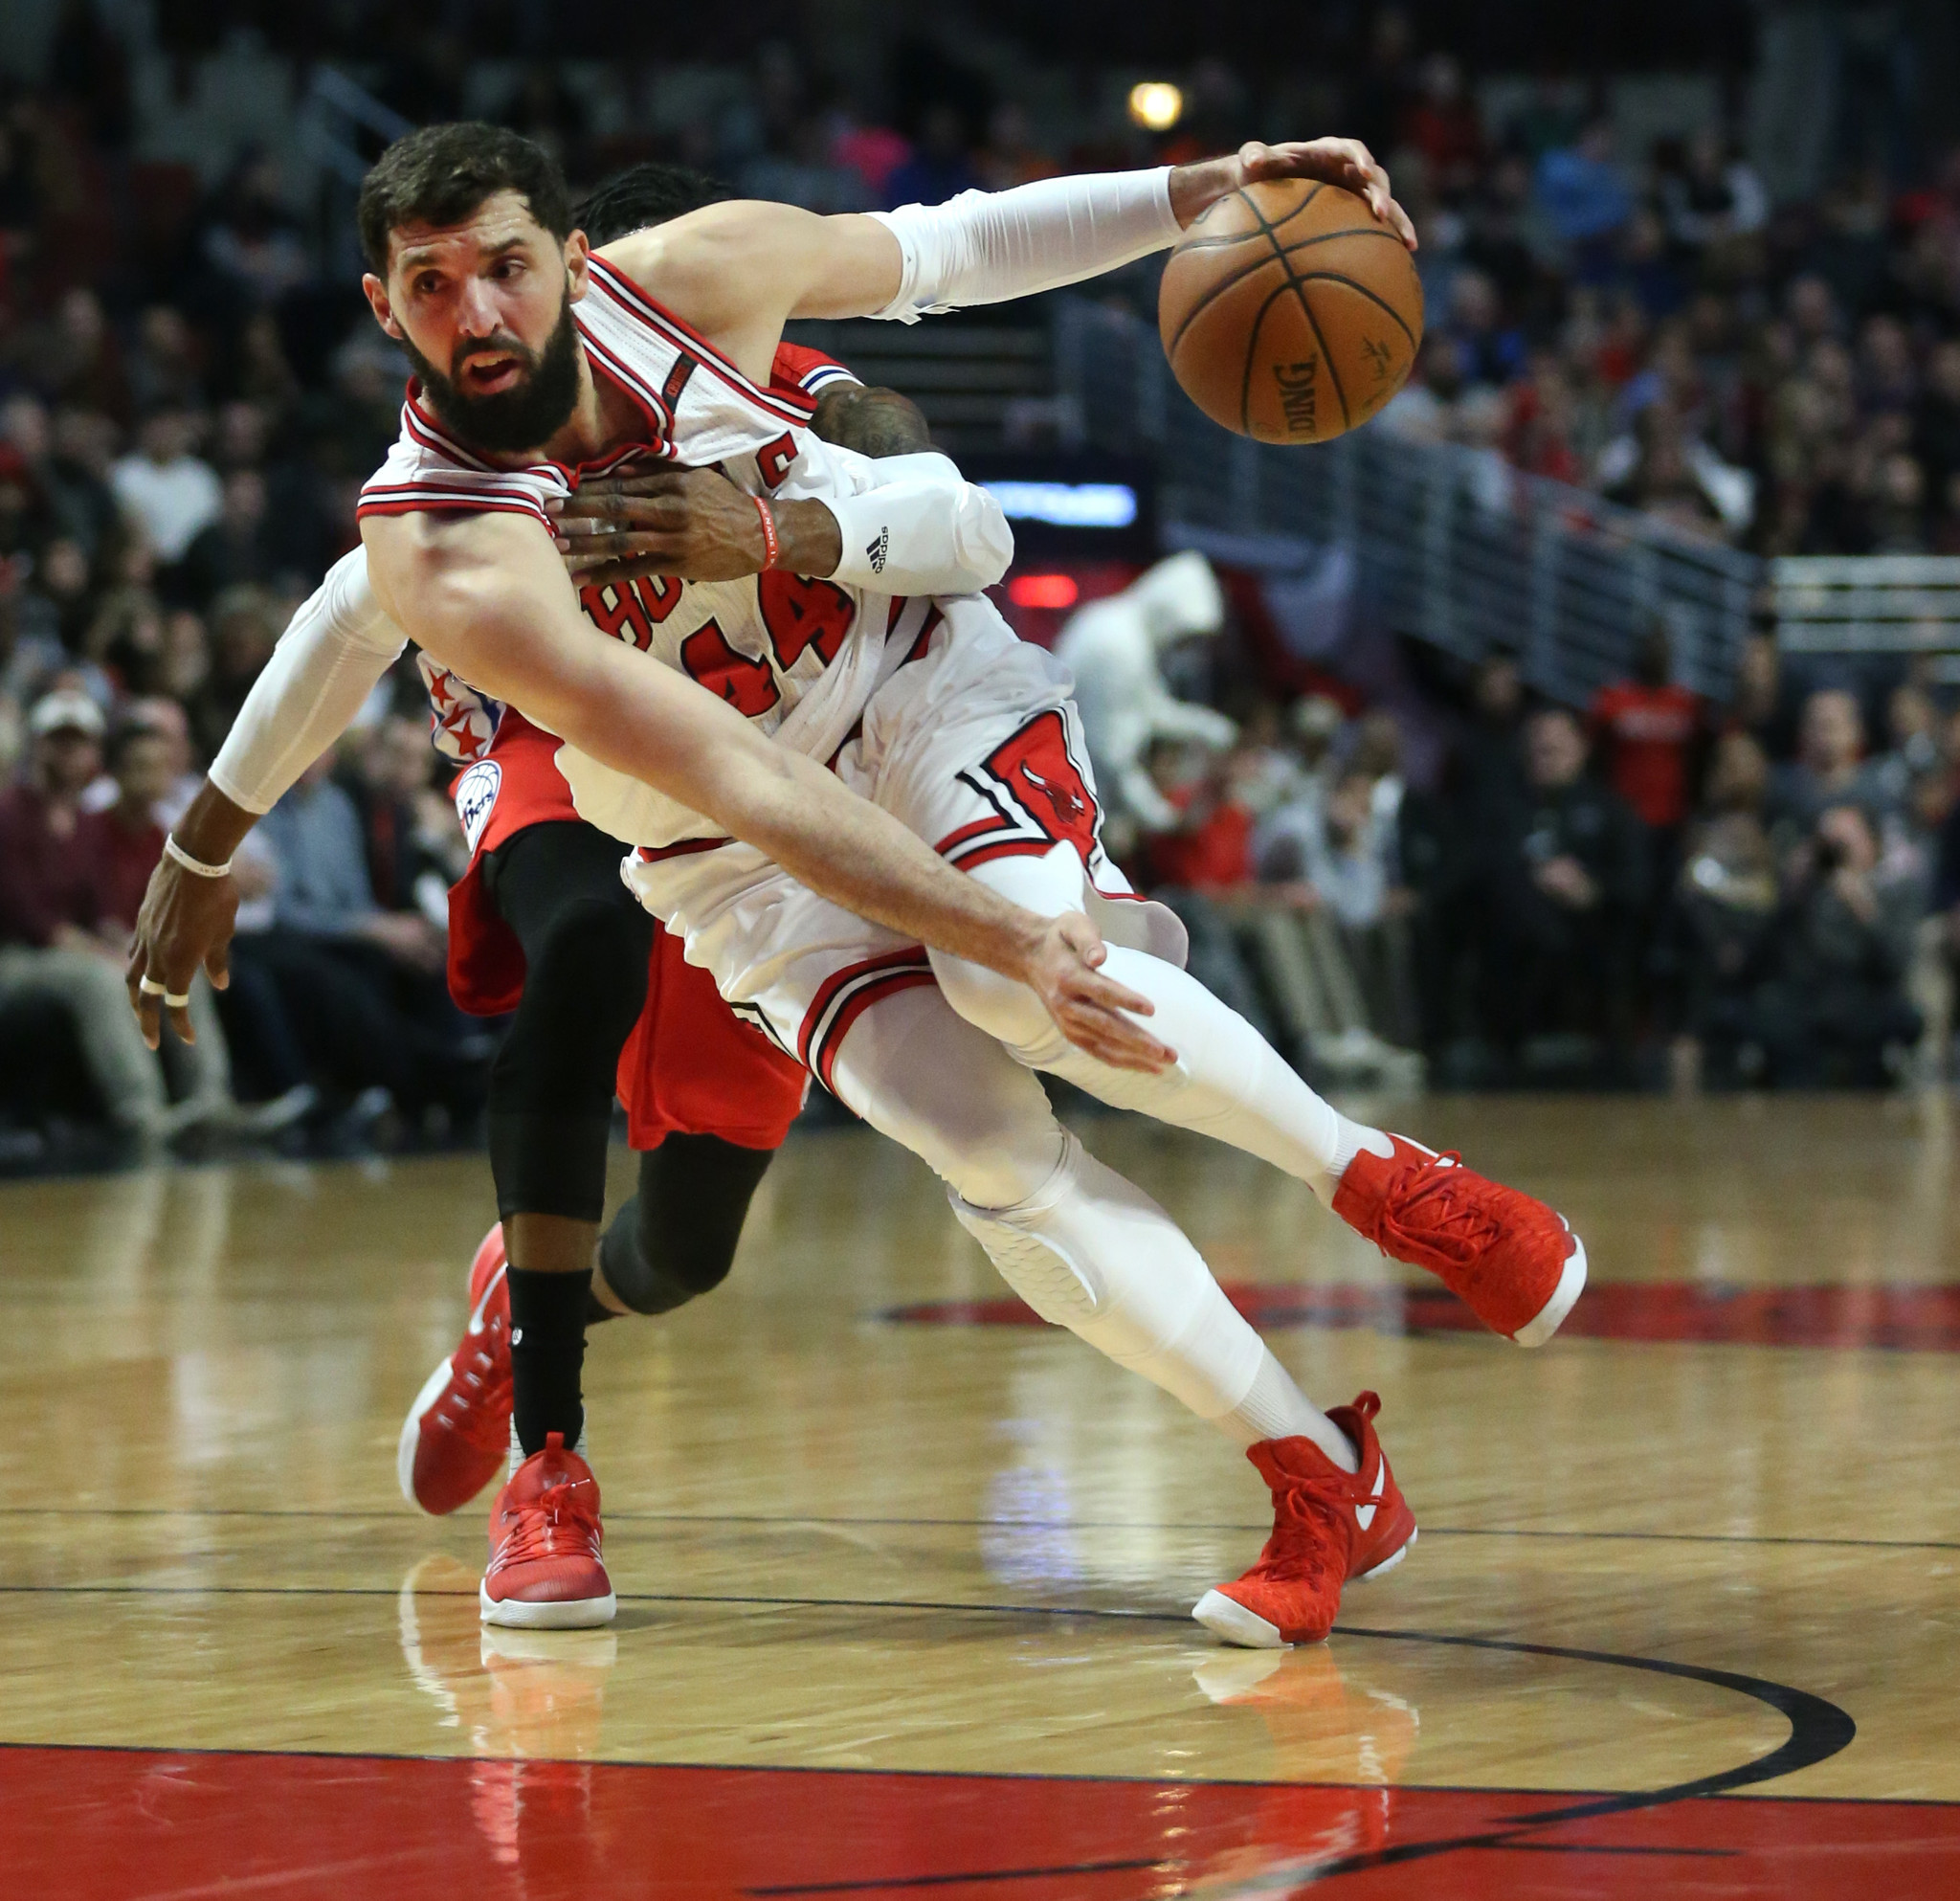 Nikola Mirotic continues to stamp March as his month to shine